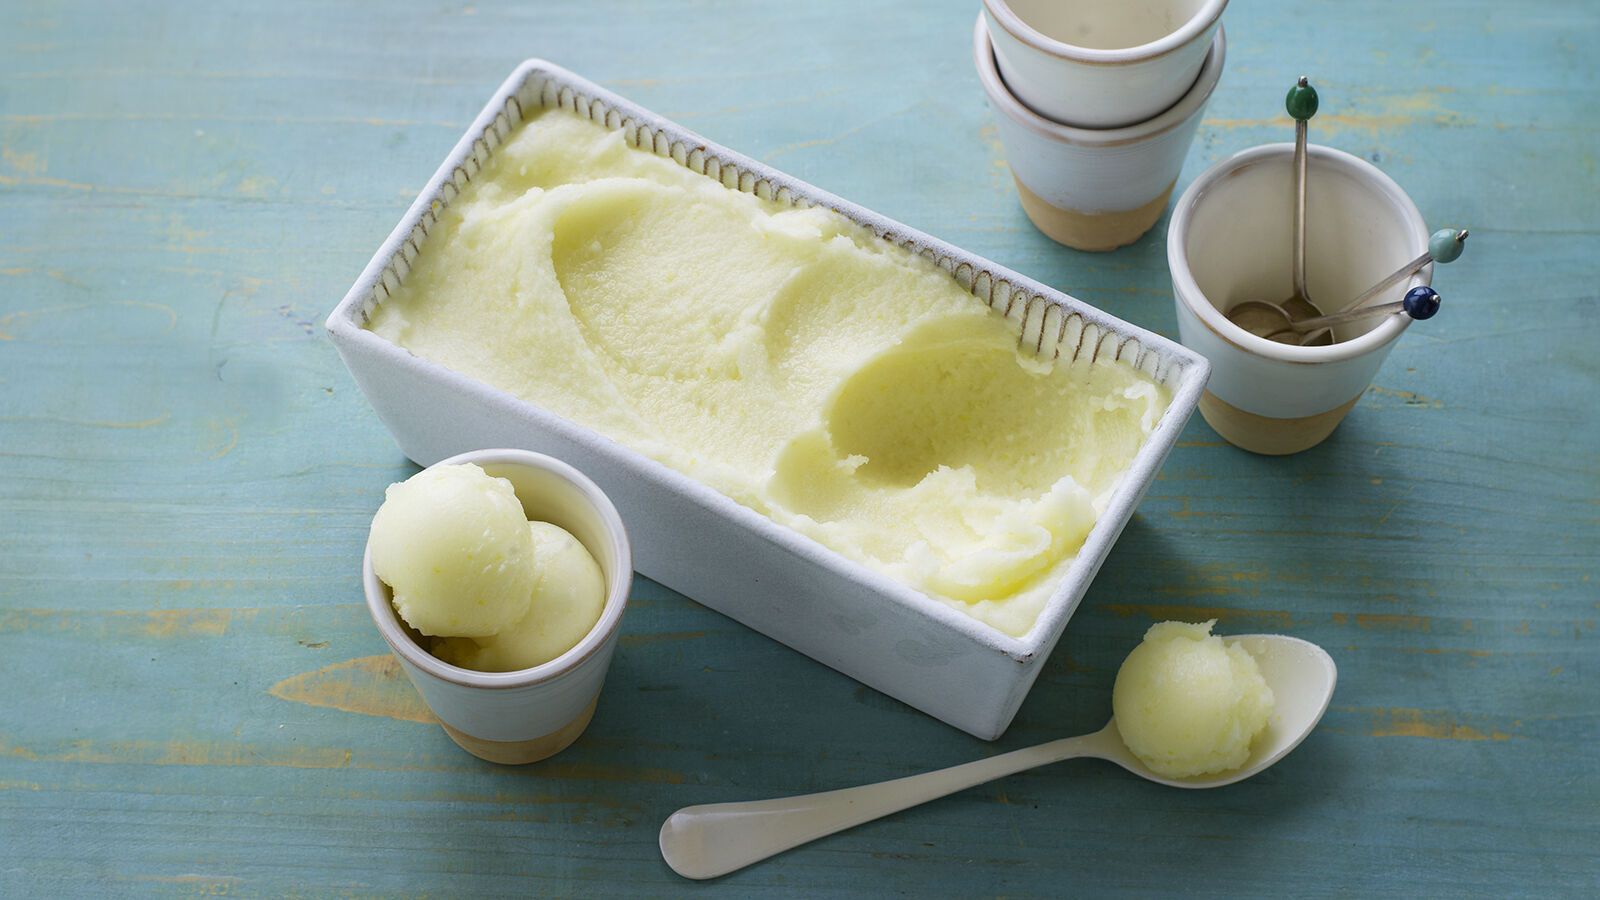 Sorbet at home